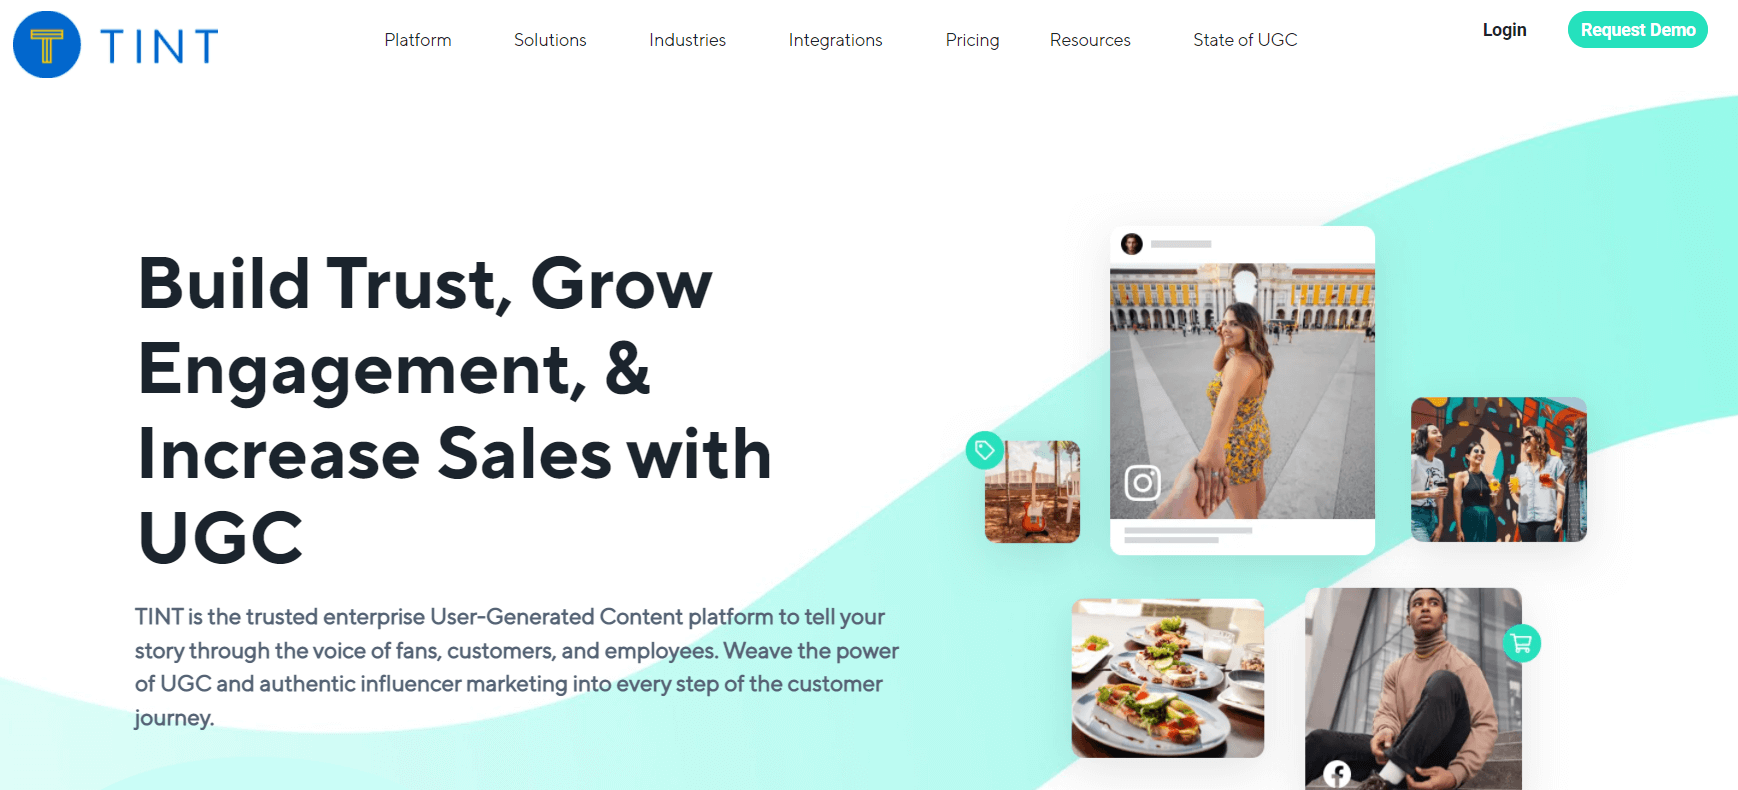 Tint homepage: Build Trust, Grow Engagement, and Increase Sales with UGC